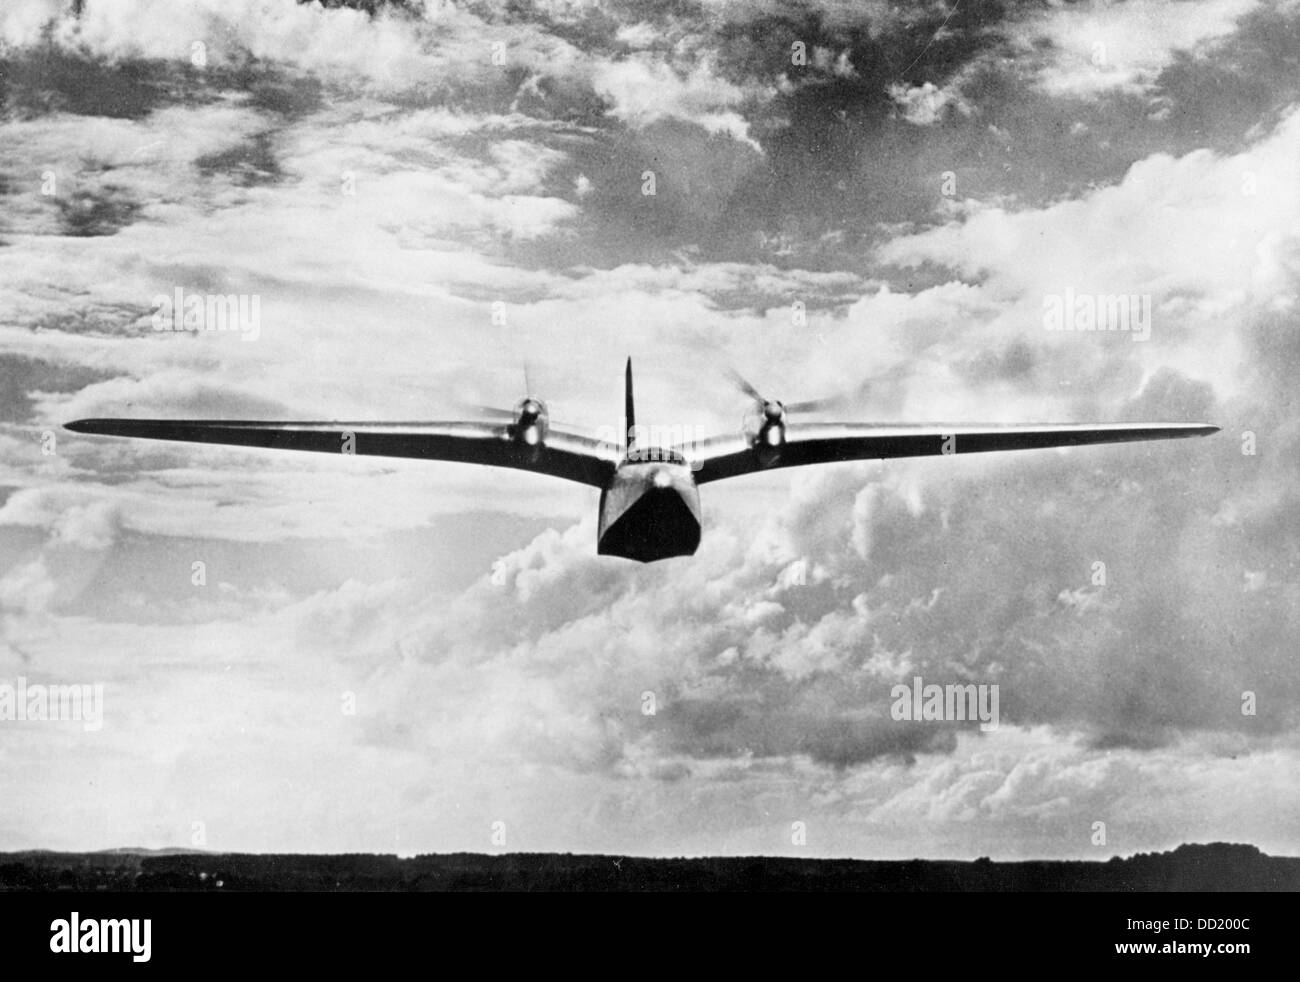 A flying boat of the type Do 26 produced by Dornier Flugzeugwerke (Dornier Aircraft Manufacturer) during a presentation at the Müggelsee in Berlin on 1 September 1938. The Dornier Do 26 was built starting in 1937 and was used for transatlantic flights of the German Wehrmacht from 1938 to 1944. The Nazi Propaganda! on the back of the picture is dated 1 September 1938: "Presentation of the transatlantic flying boat 'Do 26' at the Müggelsee near Berlin on Thursday, 1 September. - The 'Do 26' in flight. The four-engine flying boat was constructed for non-stop flights over the Atlantic Ocean. The m Stock Photo